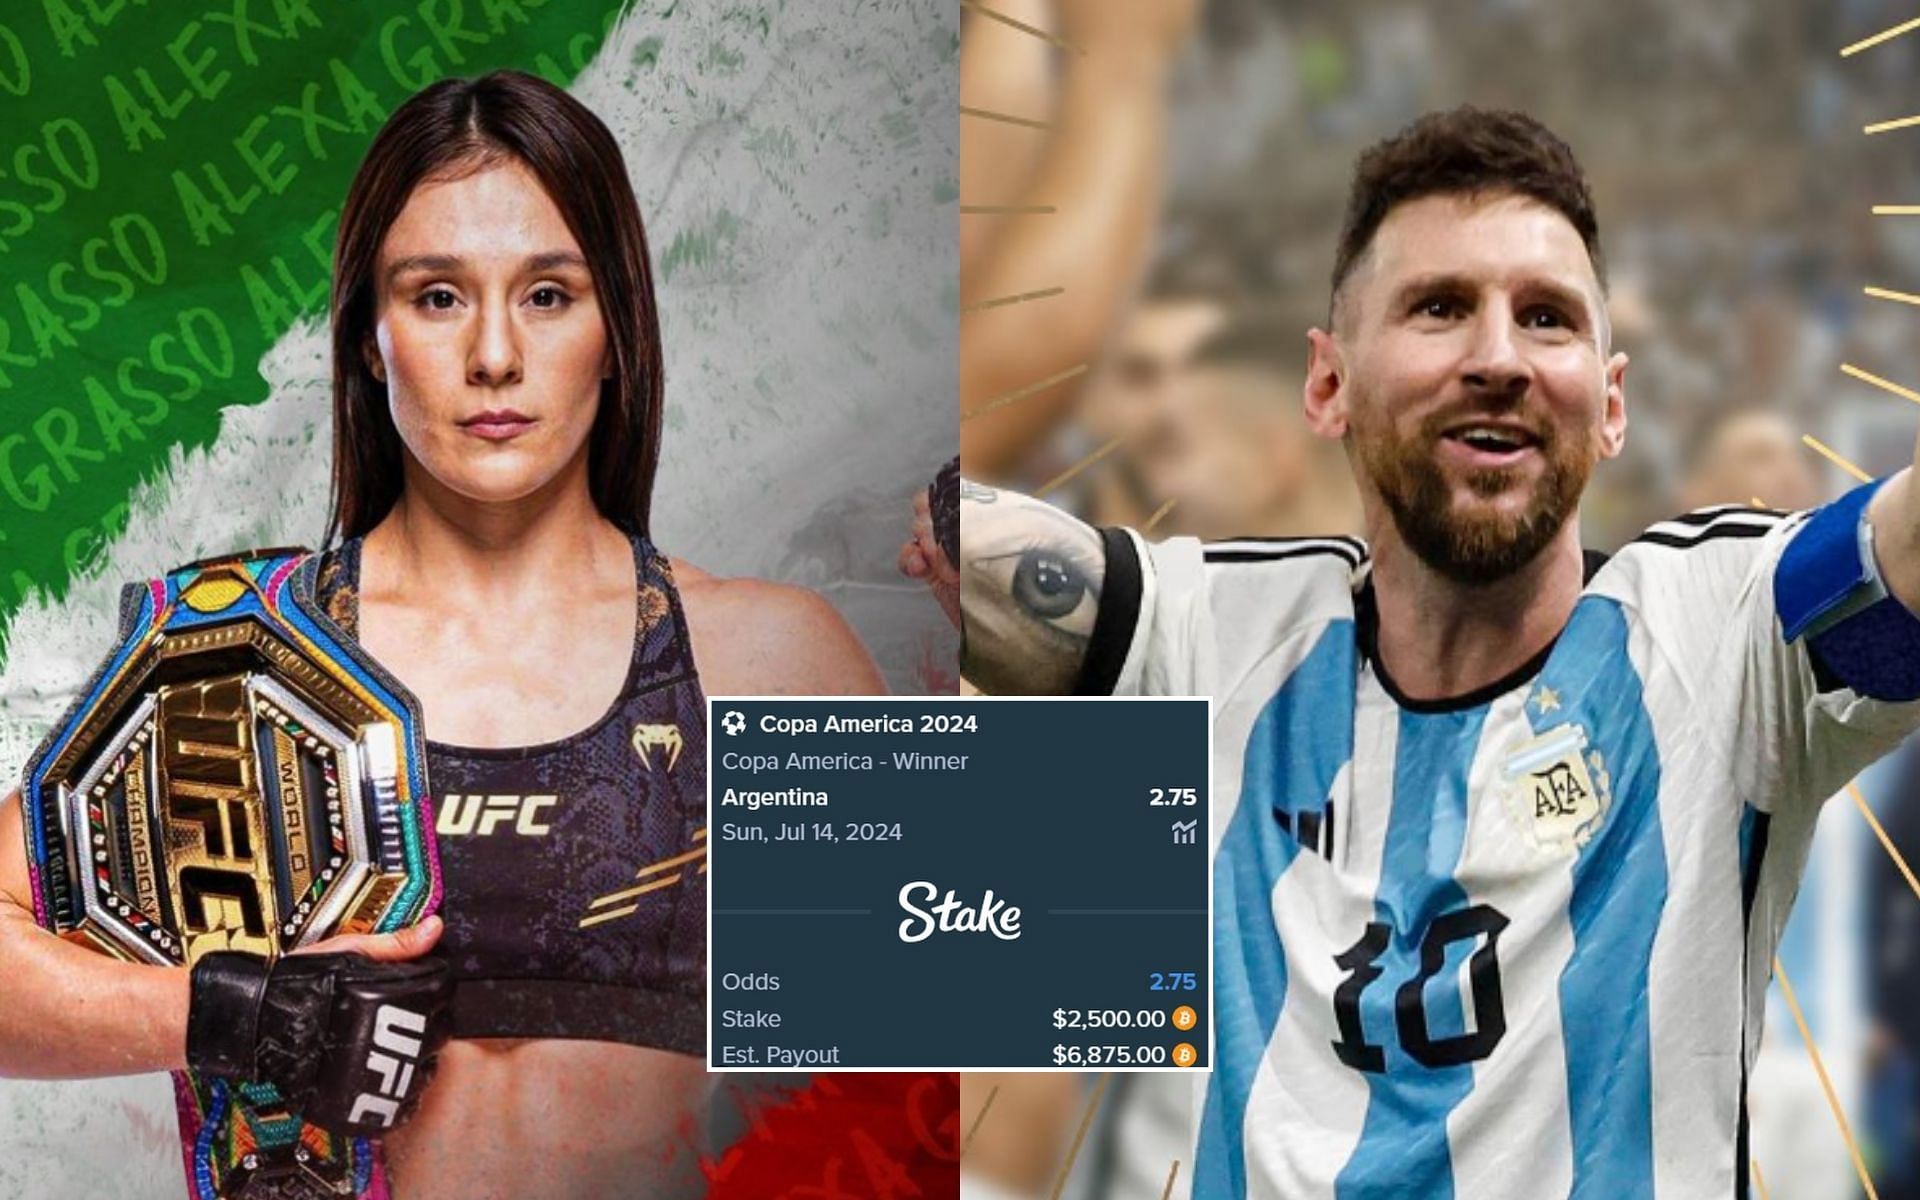 UFC flyweight queen Alexa Grasso (left) bet big (insert) on Leo Messi (right) and his team Argentina to win the Copa America Cup. [Image credity: @alex_grasso and @leomessi on Instagram]